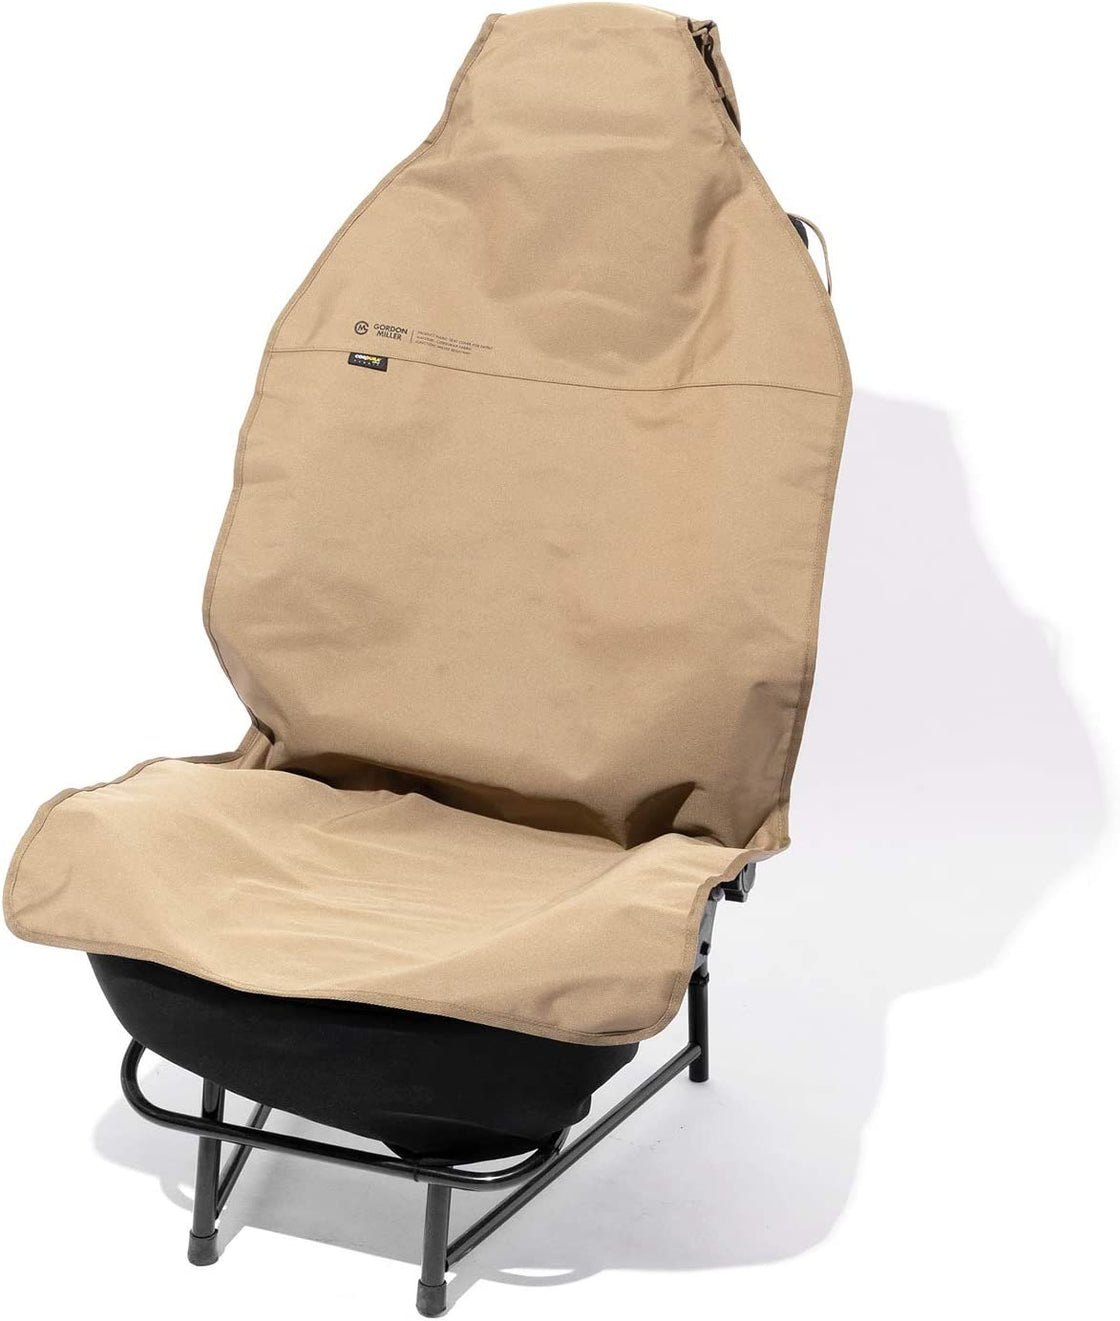 GORDON MILLER CORDURA FRONT SEAT COVER for front seat Waterproof Outdoor Camping 1642440 - WAFUU JAPAN